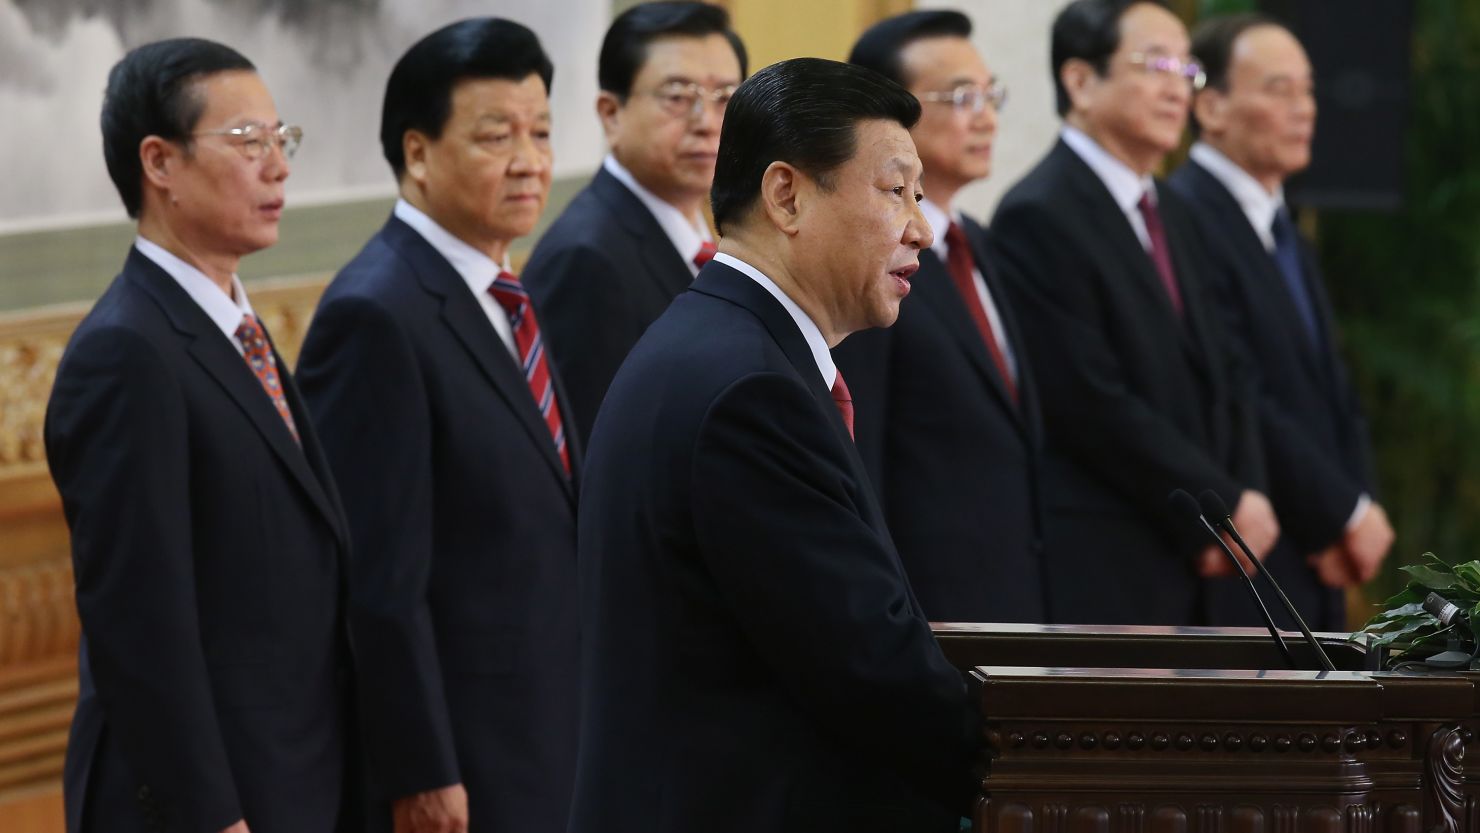 Communist Party Xi Jinping, front, spoke after the Politburo Standing Committee members were revealed in November in Beijing.